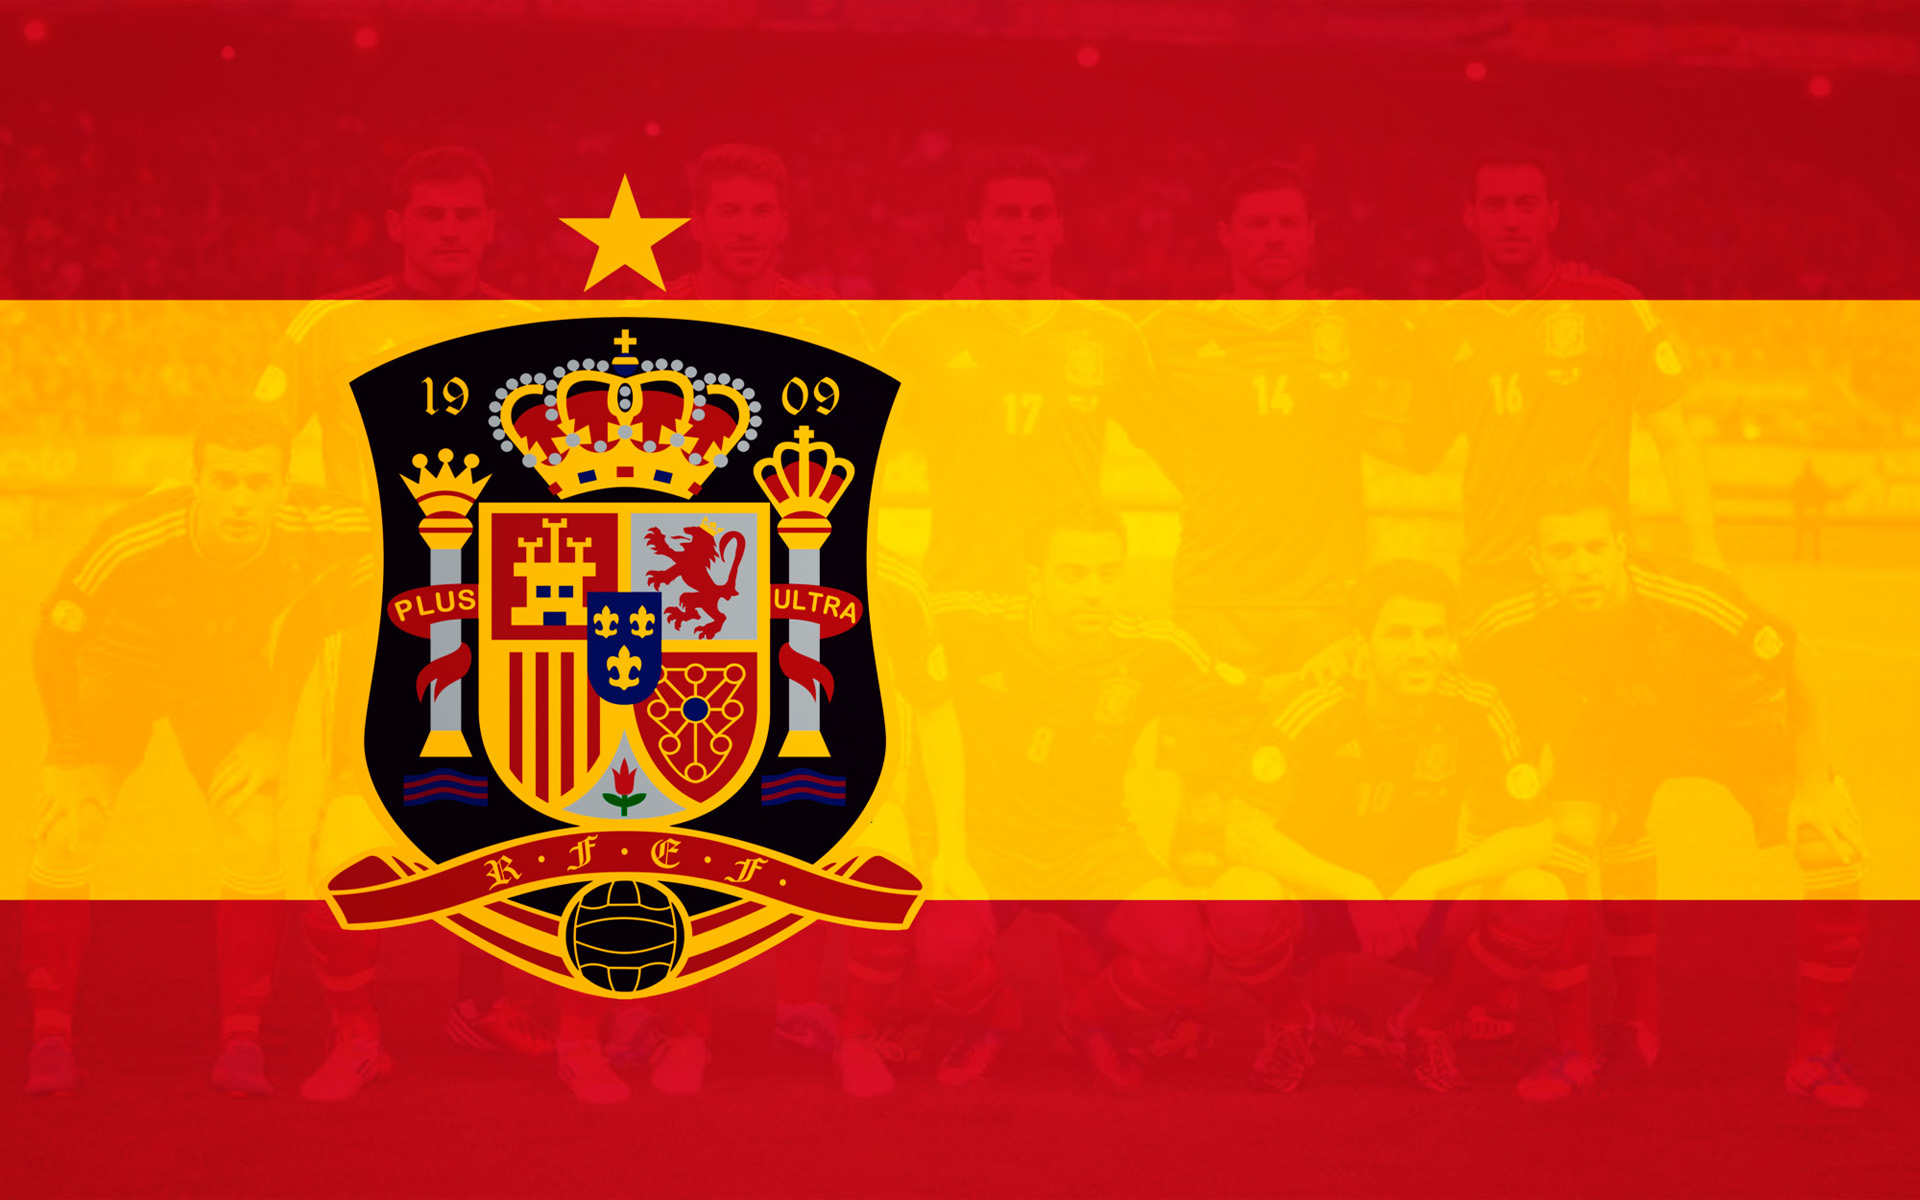 Spain Flag Image And Wallpaper For Mac Pc Bsnscb